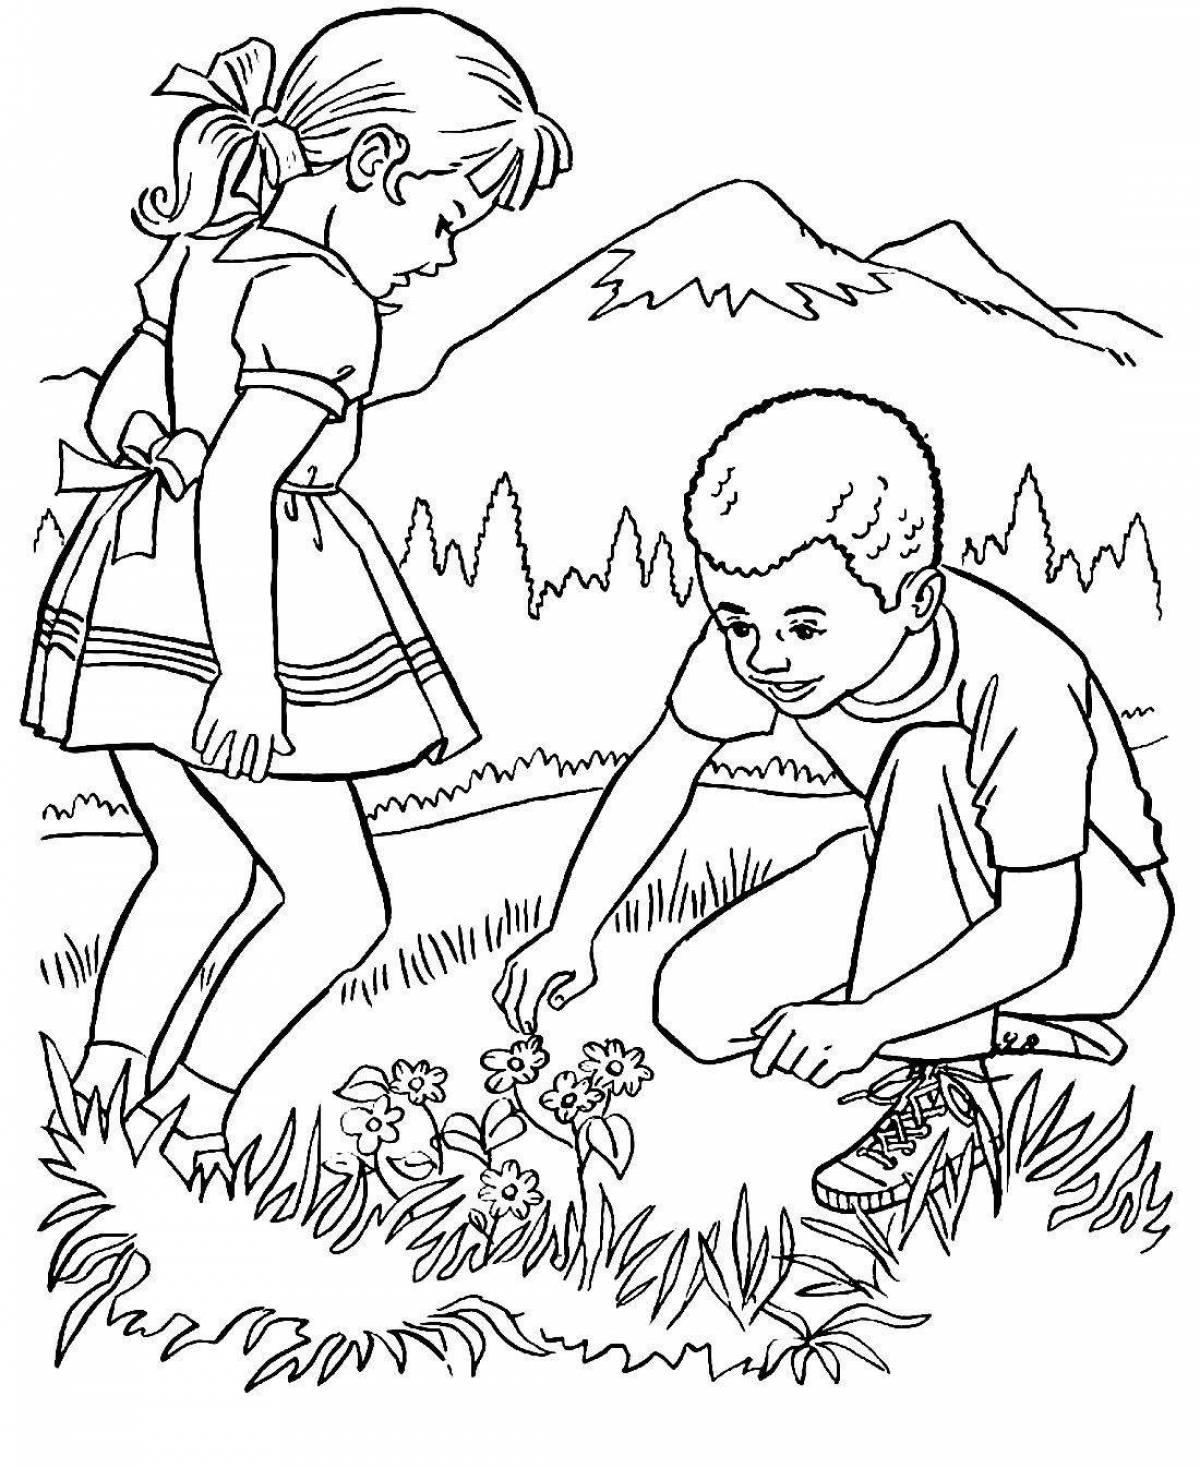 Generous kindness coloring page